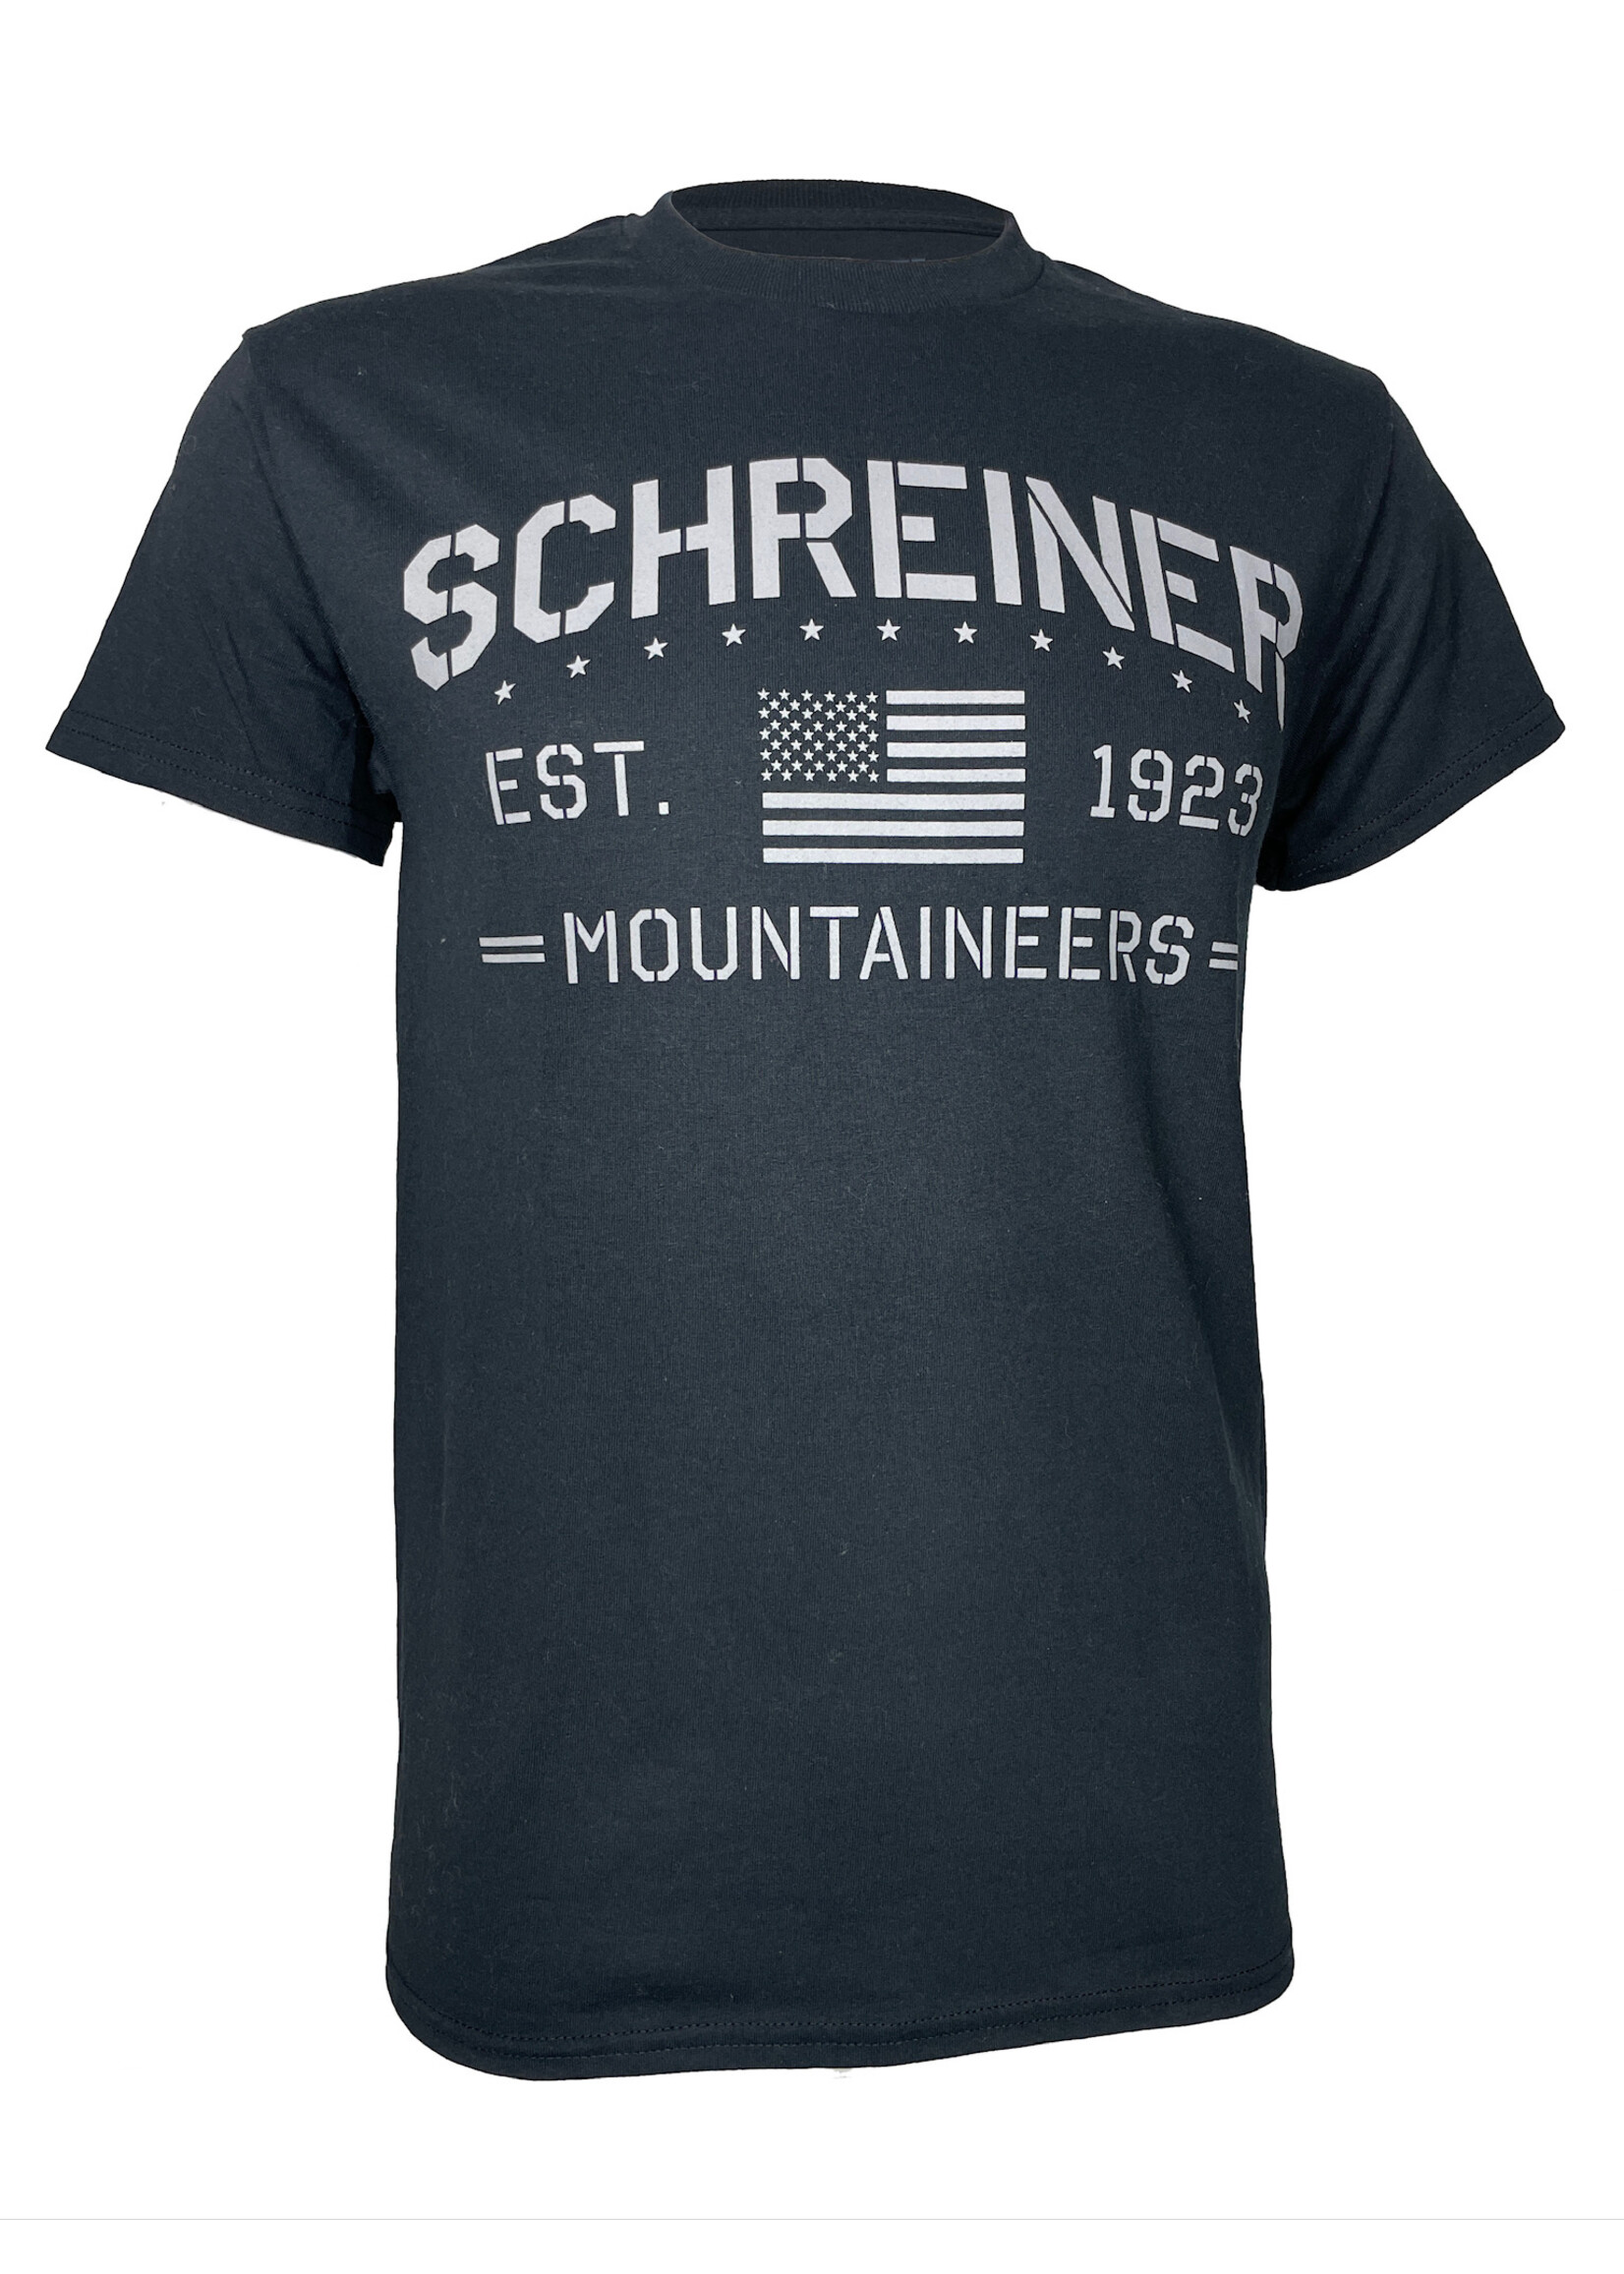 Ouray Sportswear Ouray Schreiner College Salute T-shirt